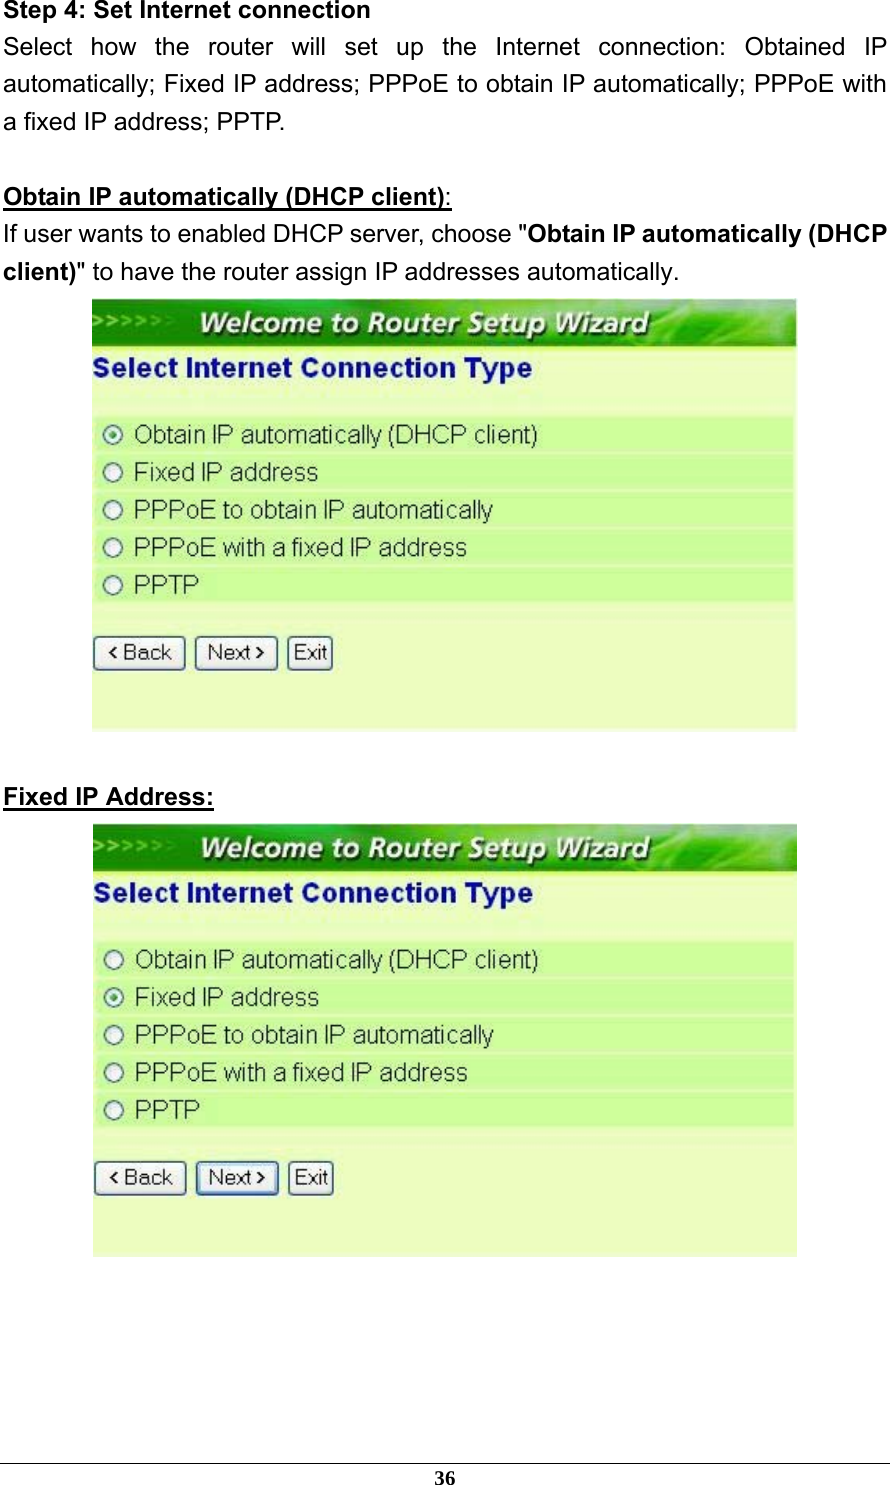 Step 4: Set Internet connection Select how the router will set up the Internet connection: Obtained IP automatically; Fixed IP address; PPPoE to obtain IP automatically; PPPoE with a fixed IP address; PPTP.  Obtain IP automatically (DHCP client): If user wants to enabled DHCP server, choose &quot;Obtain IP automatically (DHCP client)&quot; to have the router assign IP addresses automatically.   Fixed IP Address:      36 